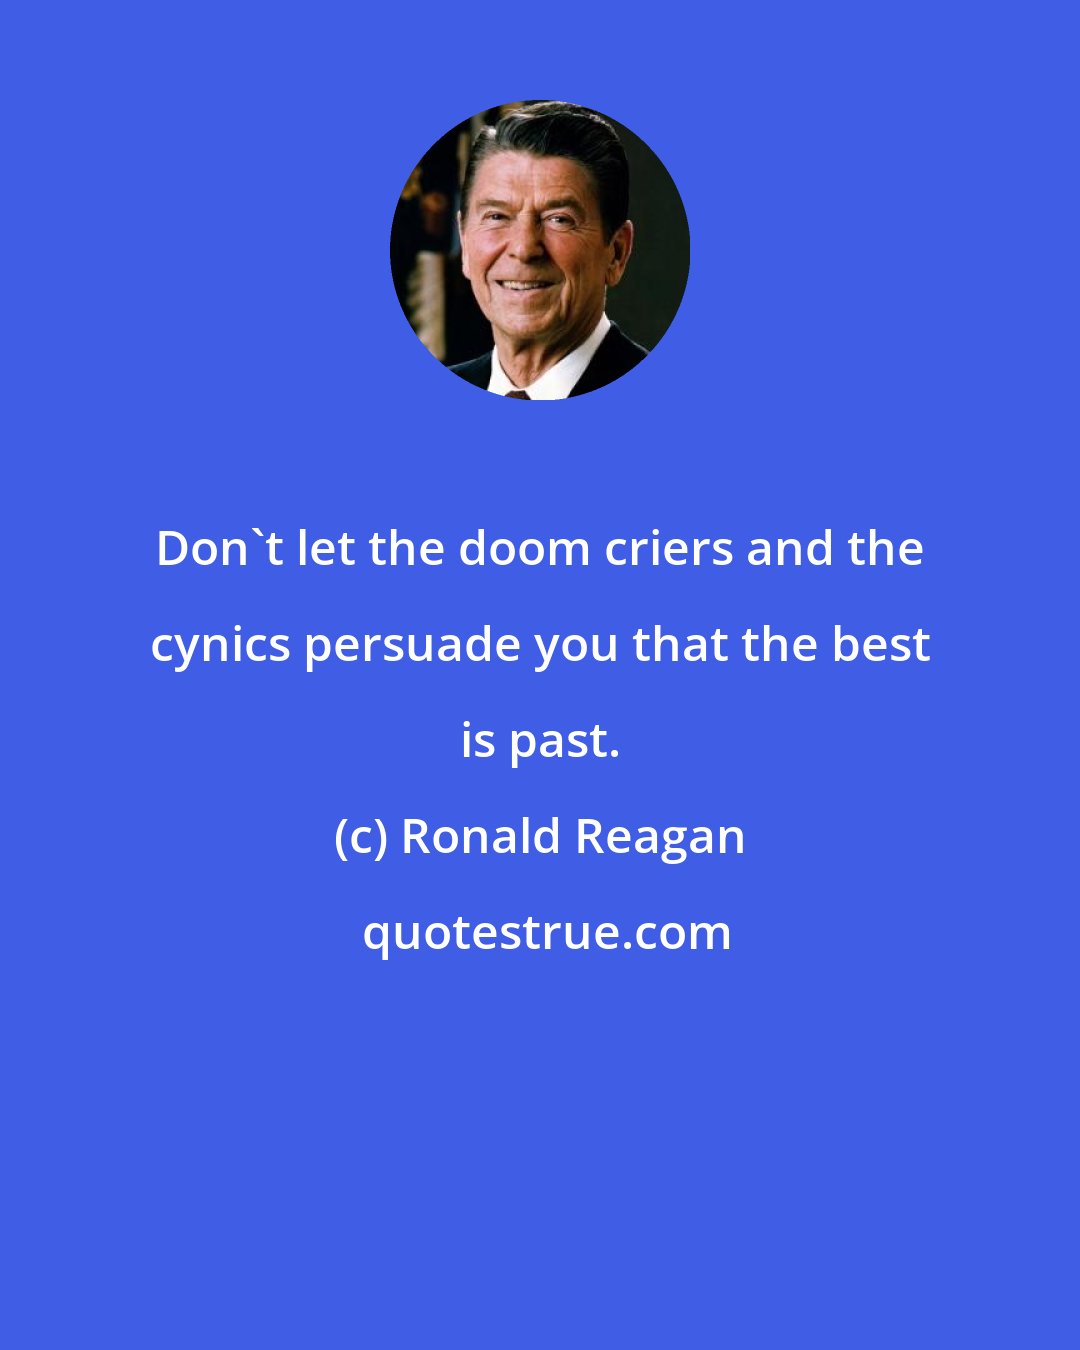 Ronald Reagan: Don't let the doom criers and the cynics persuade you that the best is past.